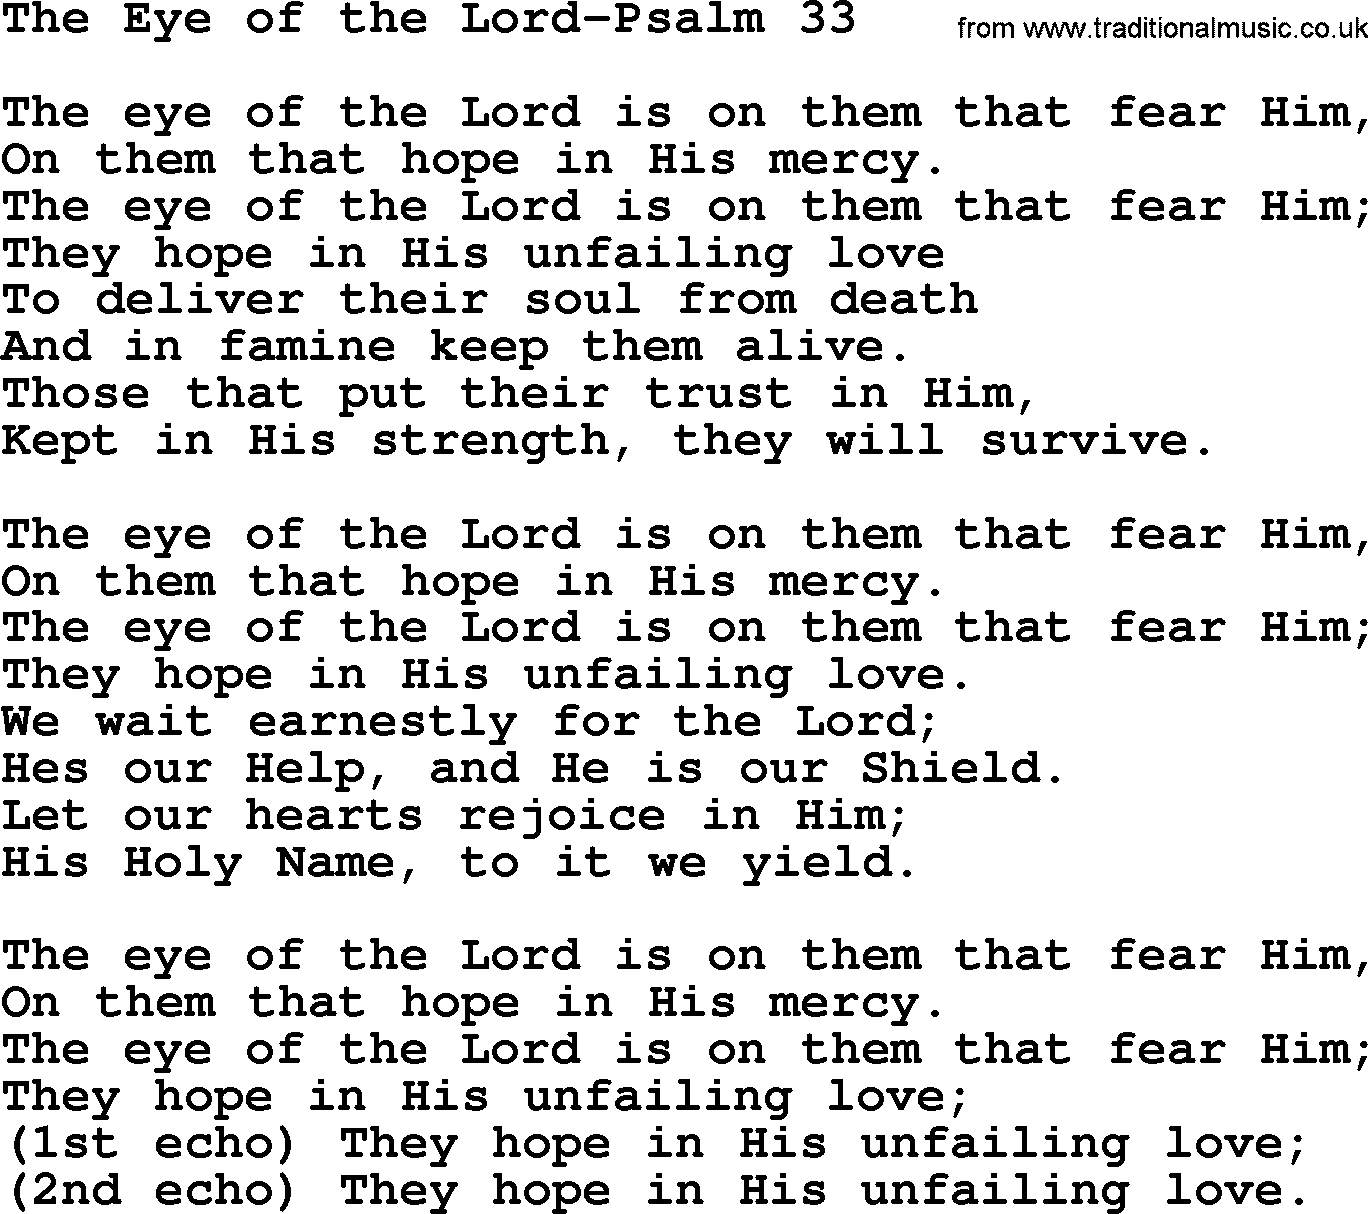 Hymns from the Psalms, Hymn: The Eye Of The Lord-Psalm 33, lyrics with PDF